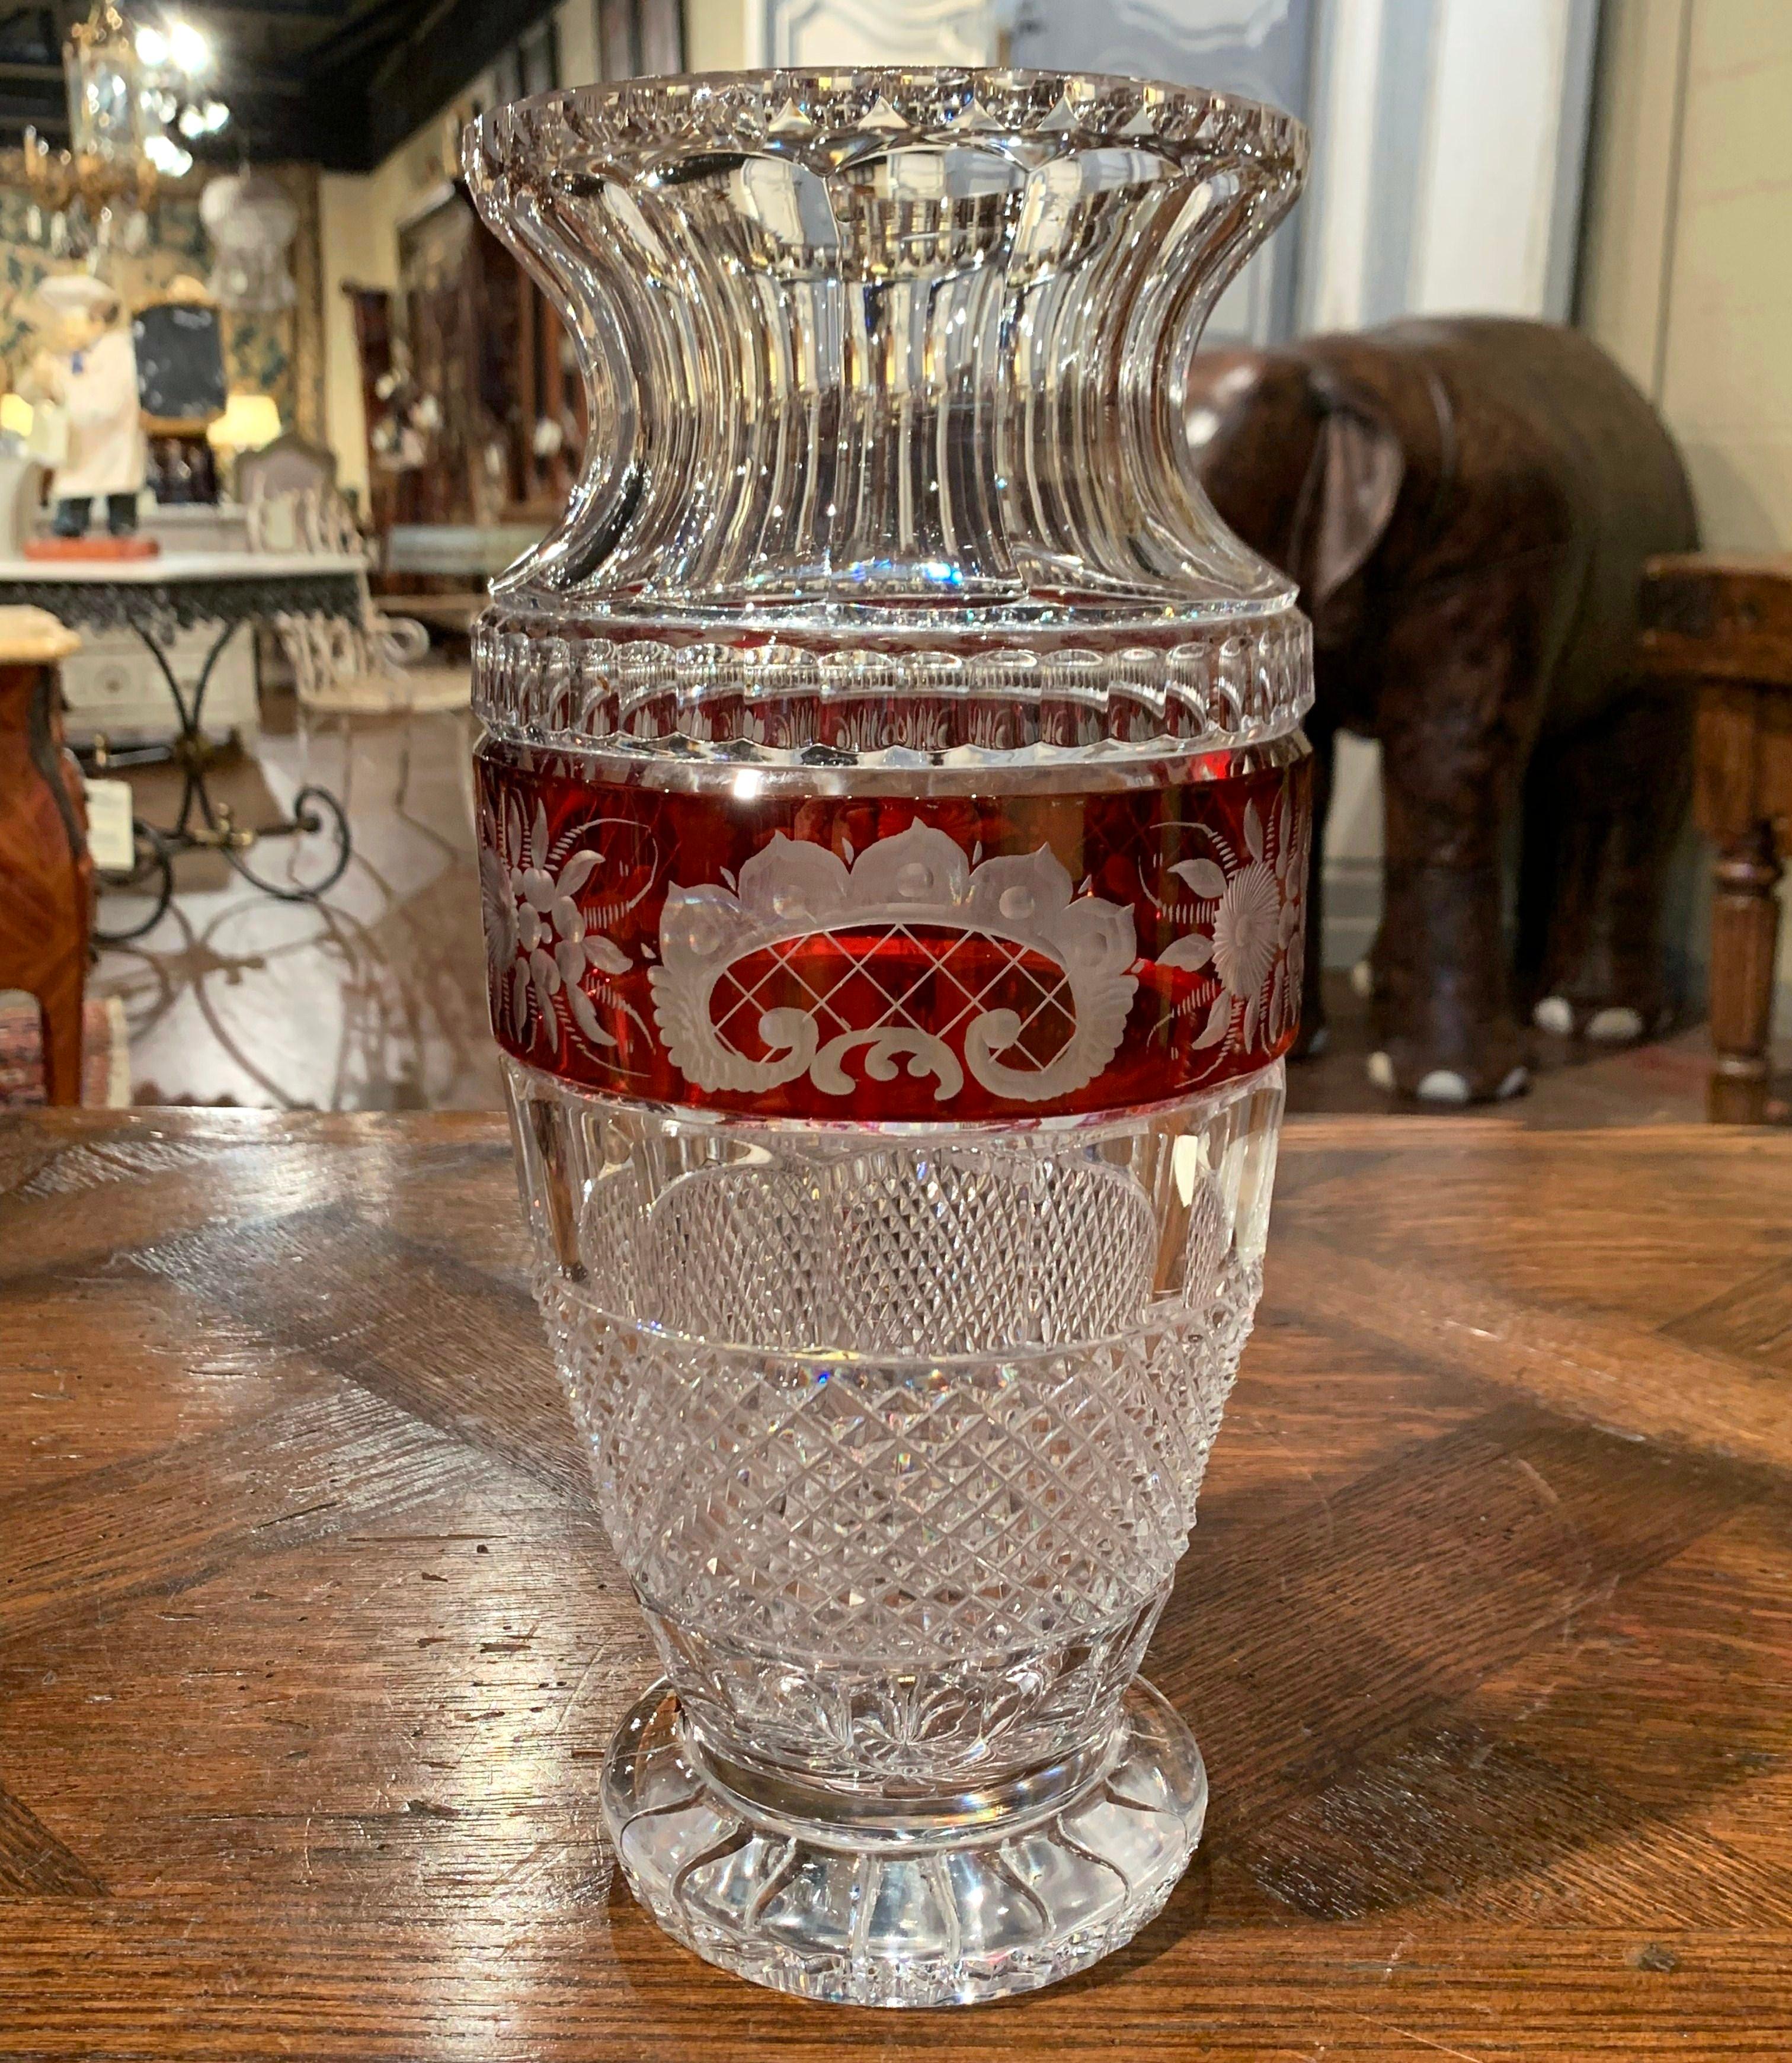 20th Century Midcentury French Cut-Glass Vase with Red Floral Motifs Saint Louis Style